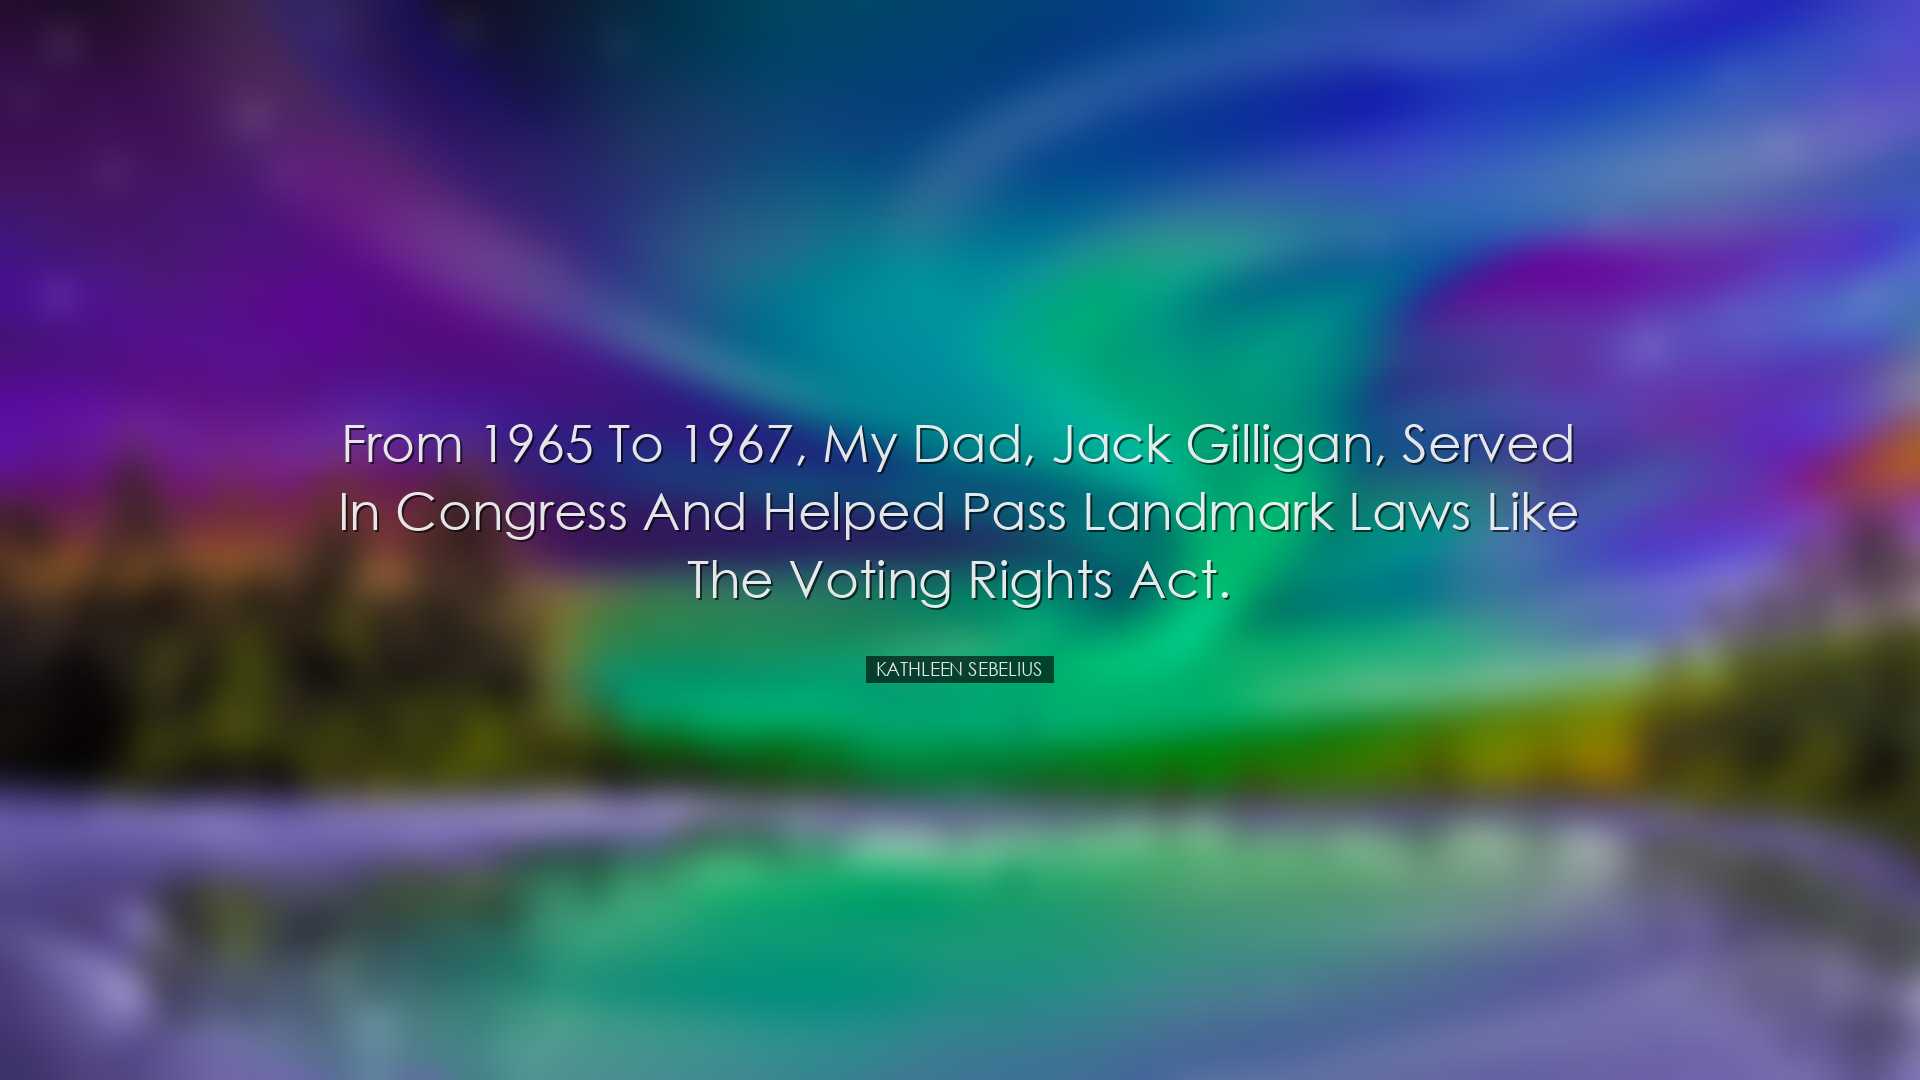 From 1965 to 1967, my dad, Jack Gilligan, served in Congress and h